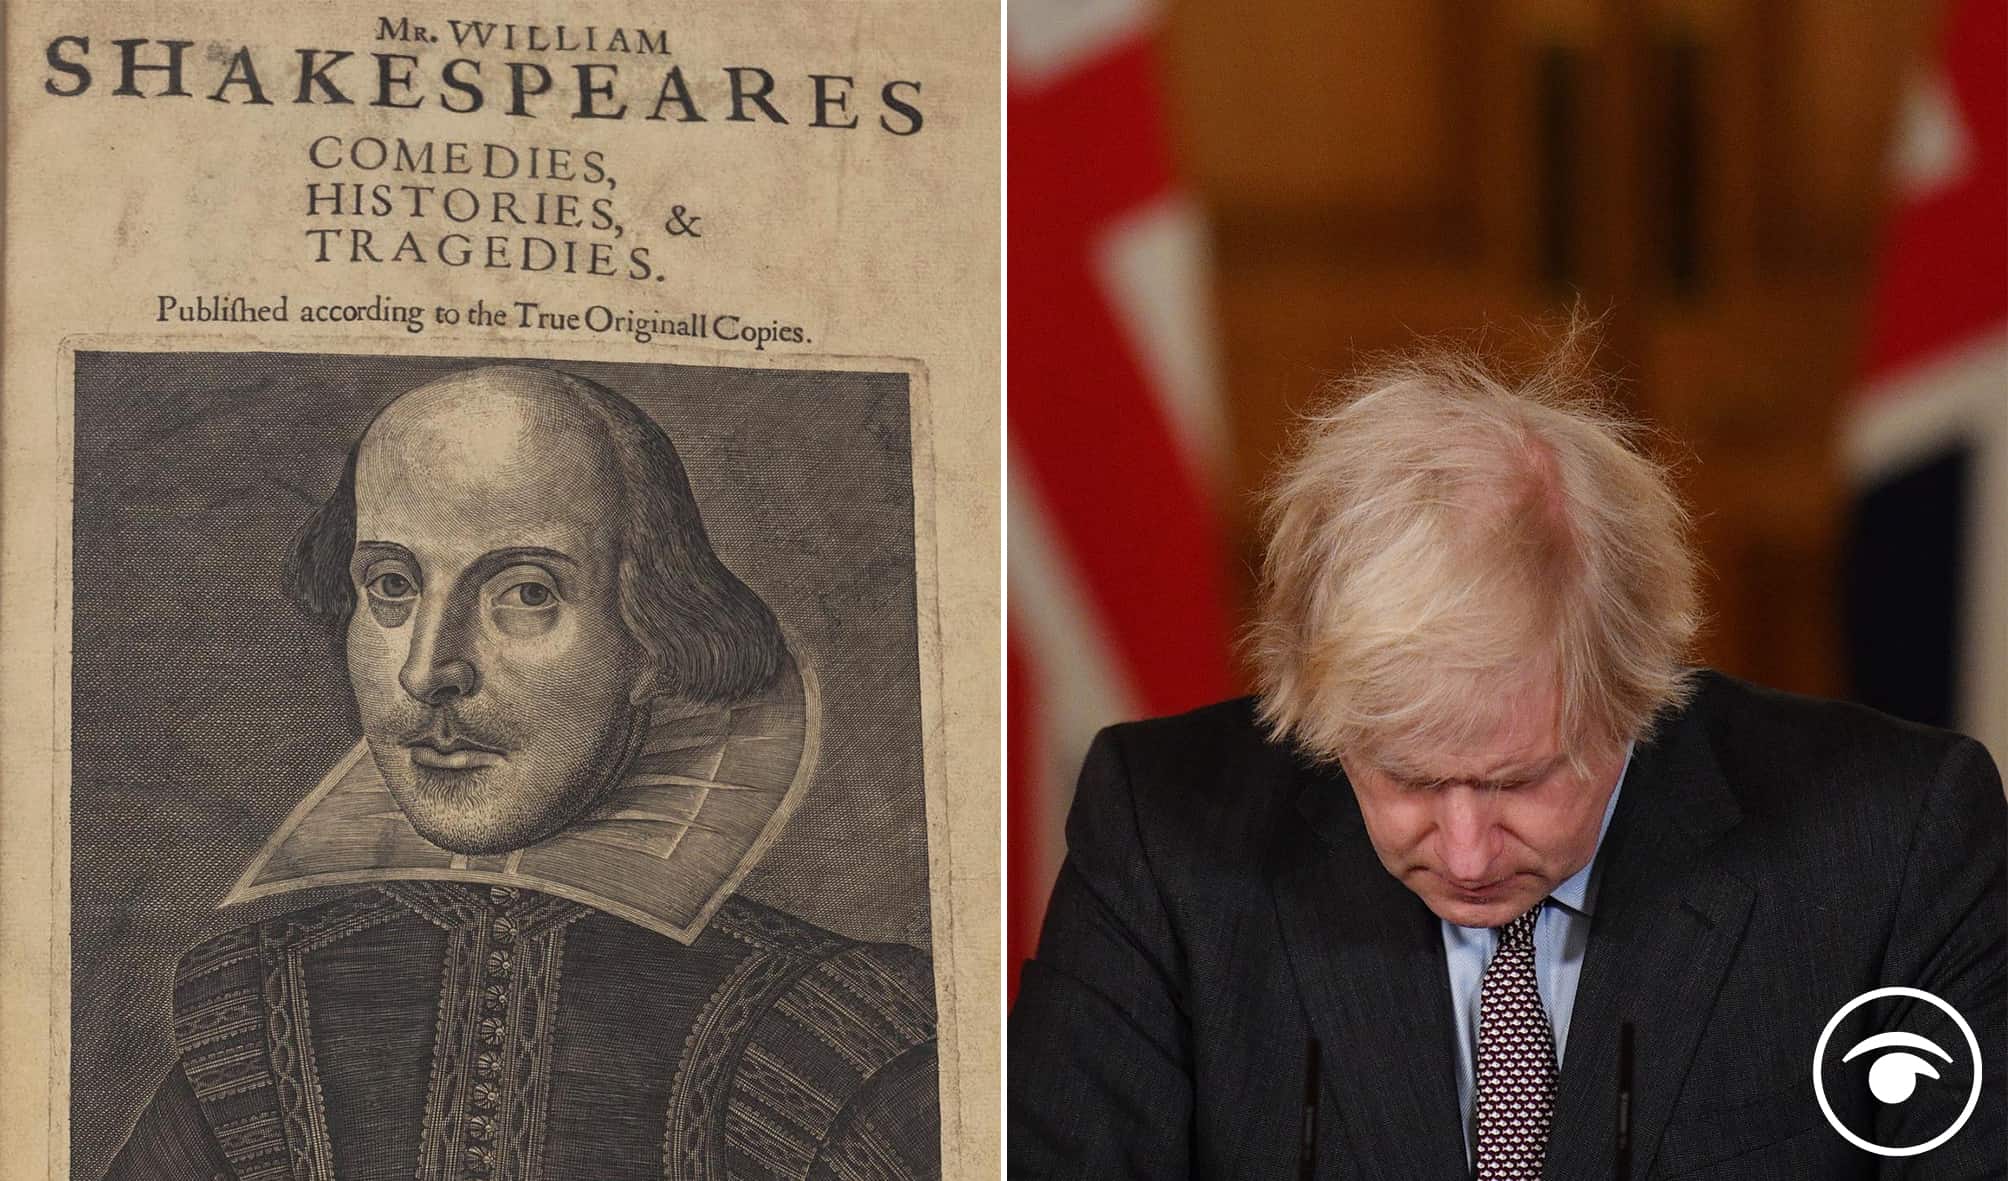 Watch: Minister’s anger when asked if PM missed COBRA meetings to write Shakespeare biography